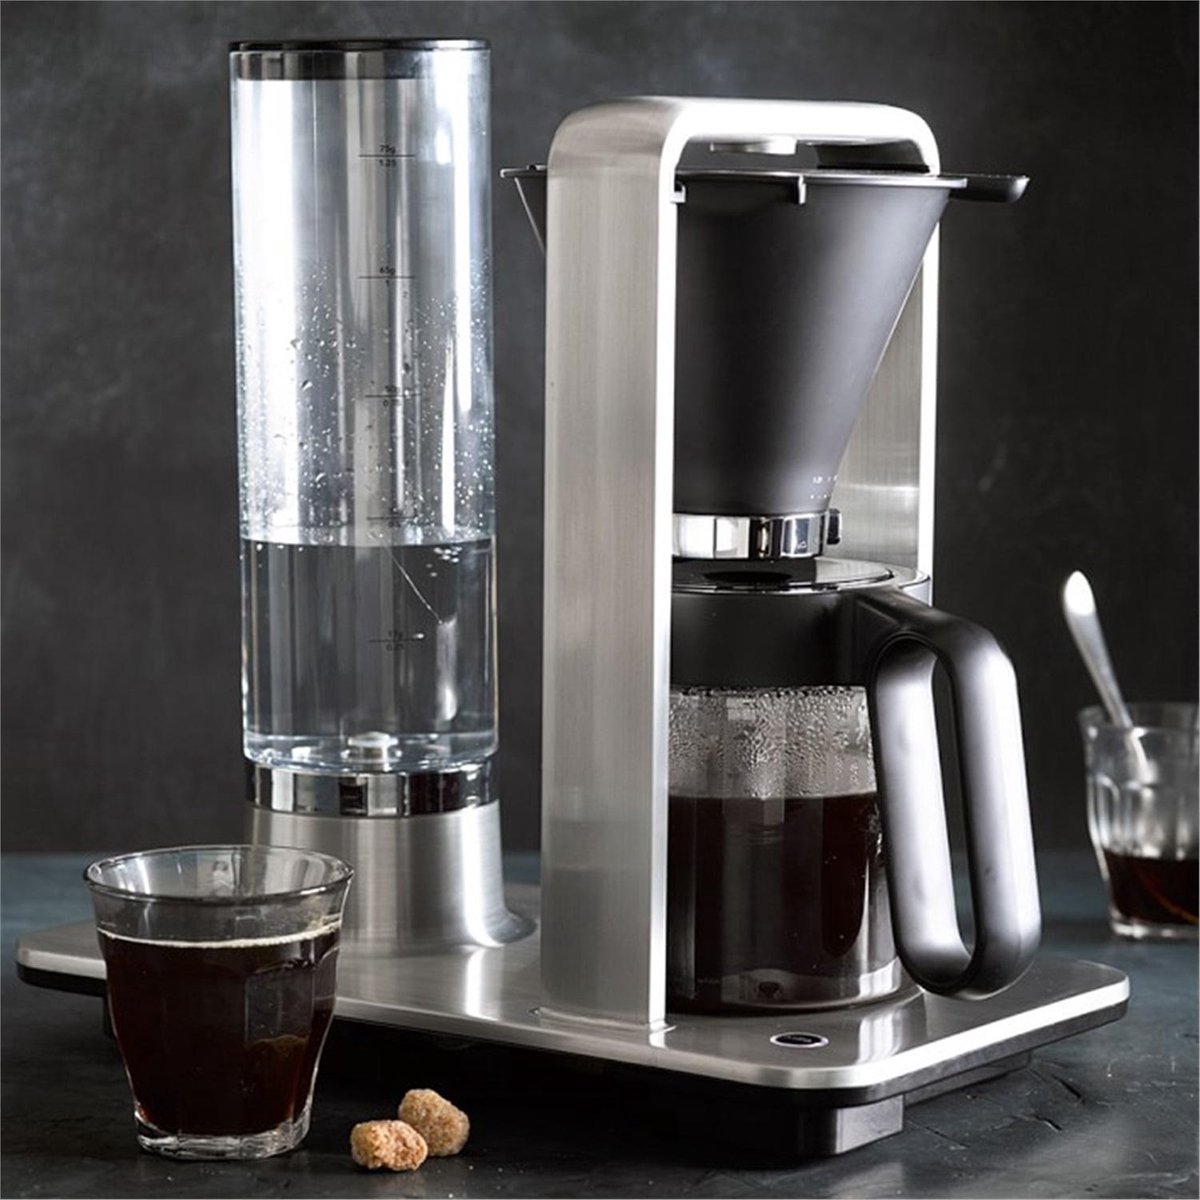 Wilfa Coffee Maker Review: Is It Worth the Hype?